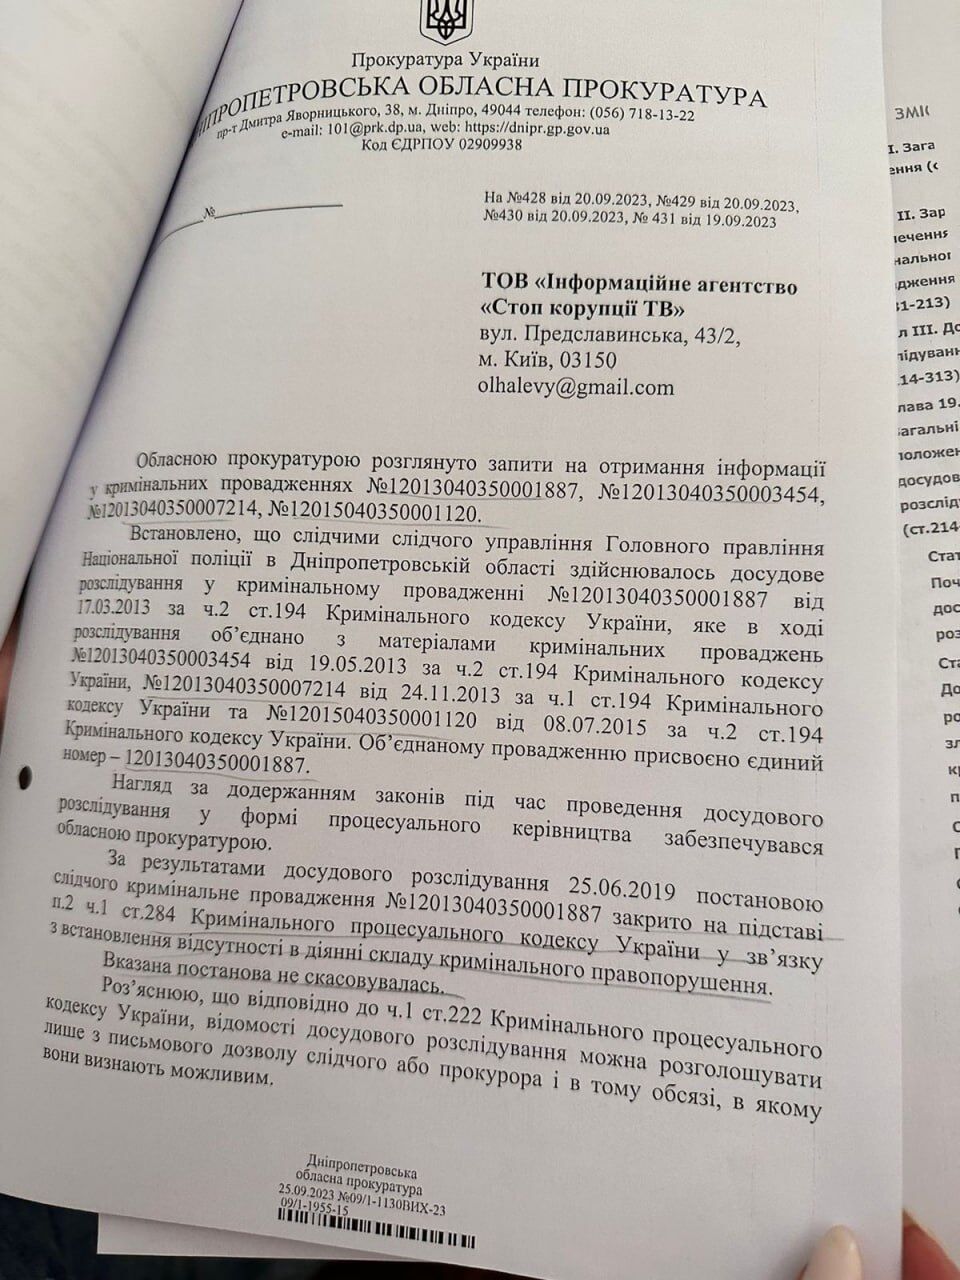 A number of proceedings in which Prishedko appeared